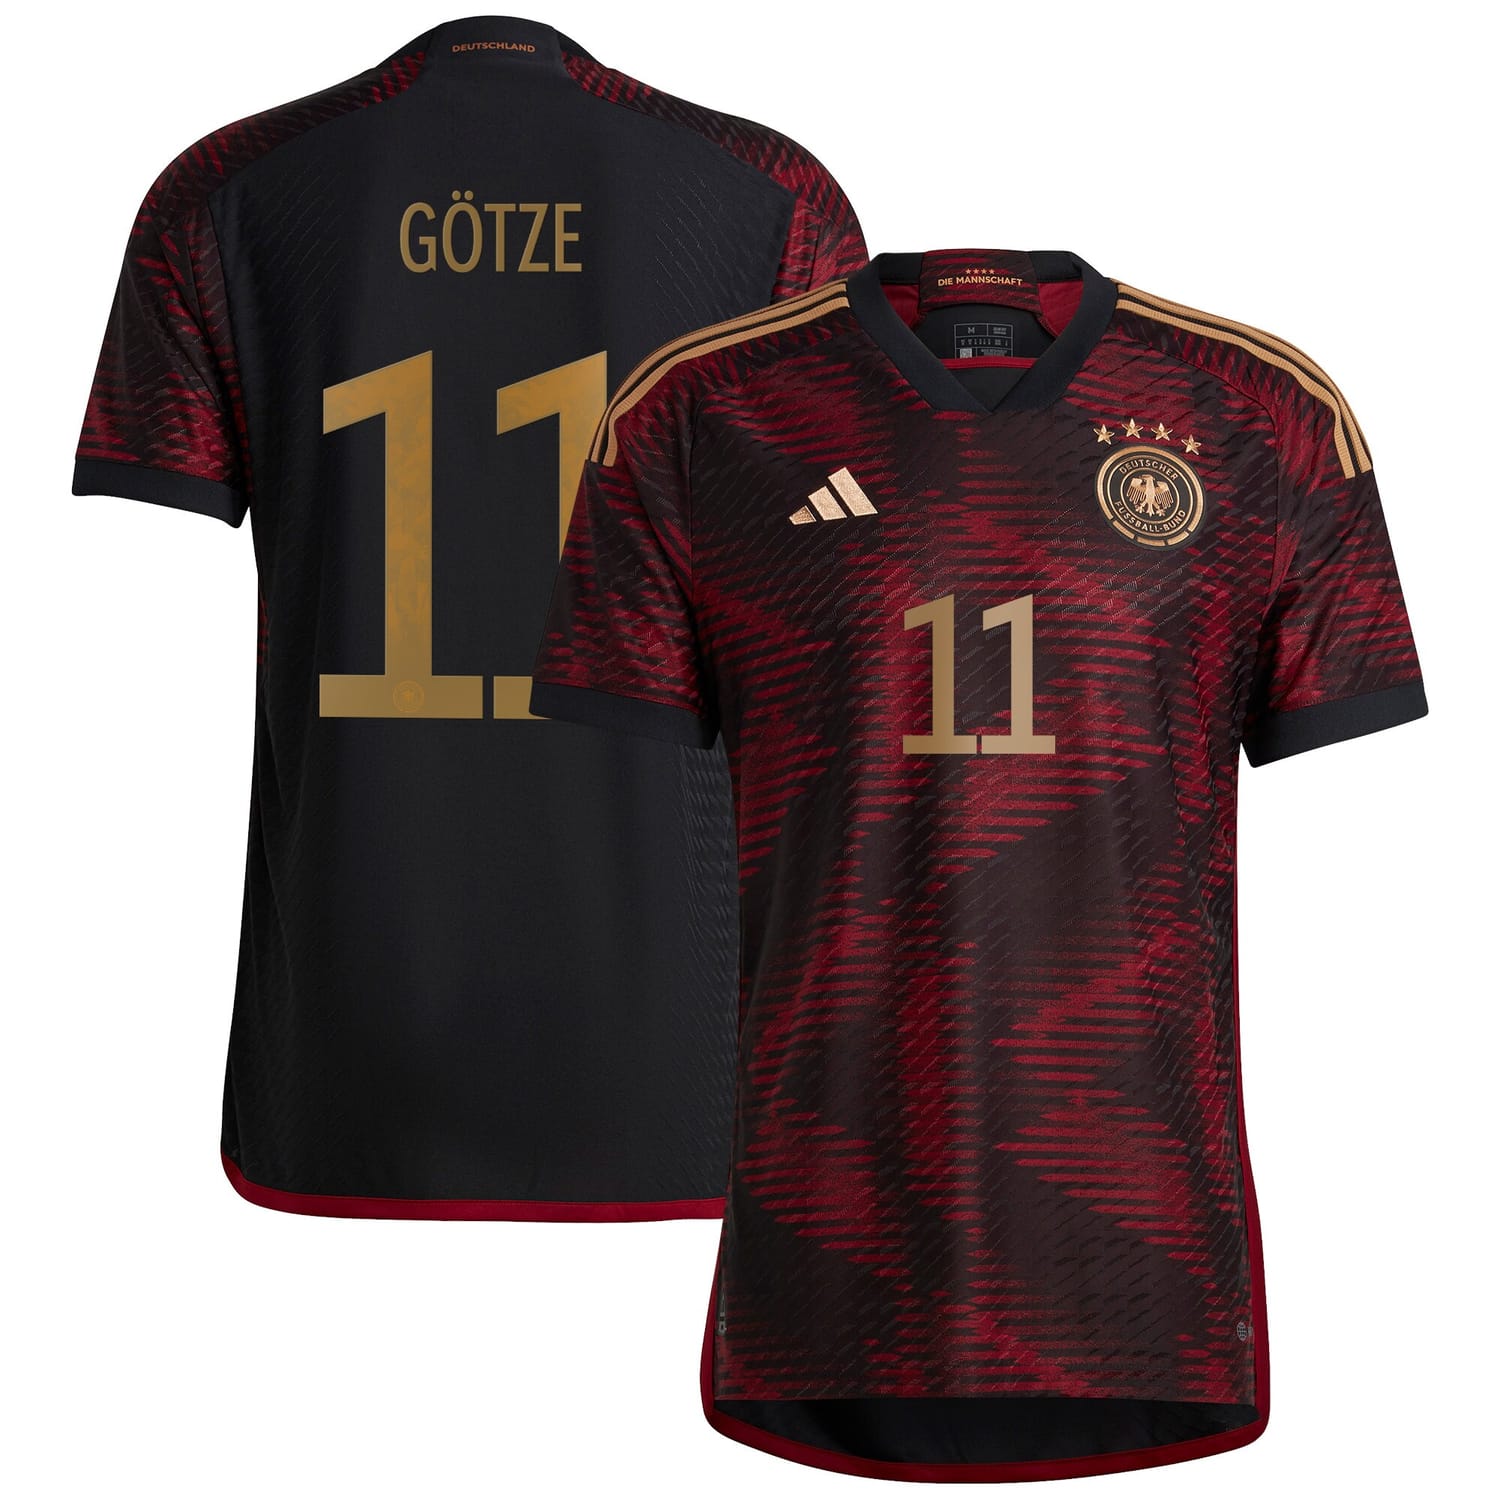 Germany National Team Away Authentic Jersey Shirt 2022 player Mario Götze 11 printing for Men